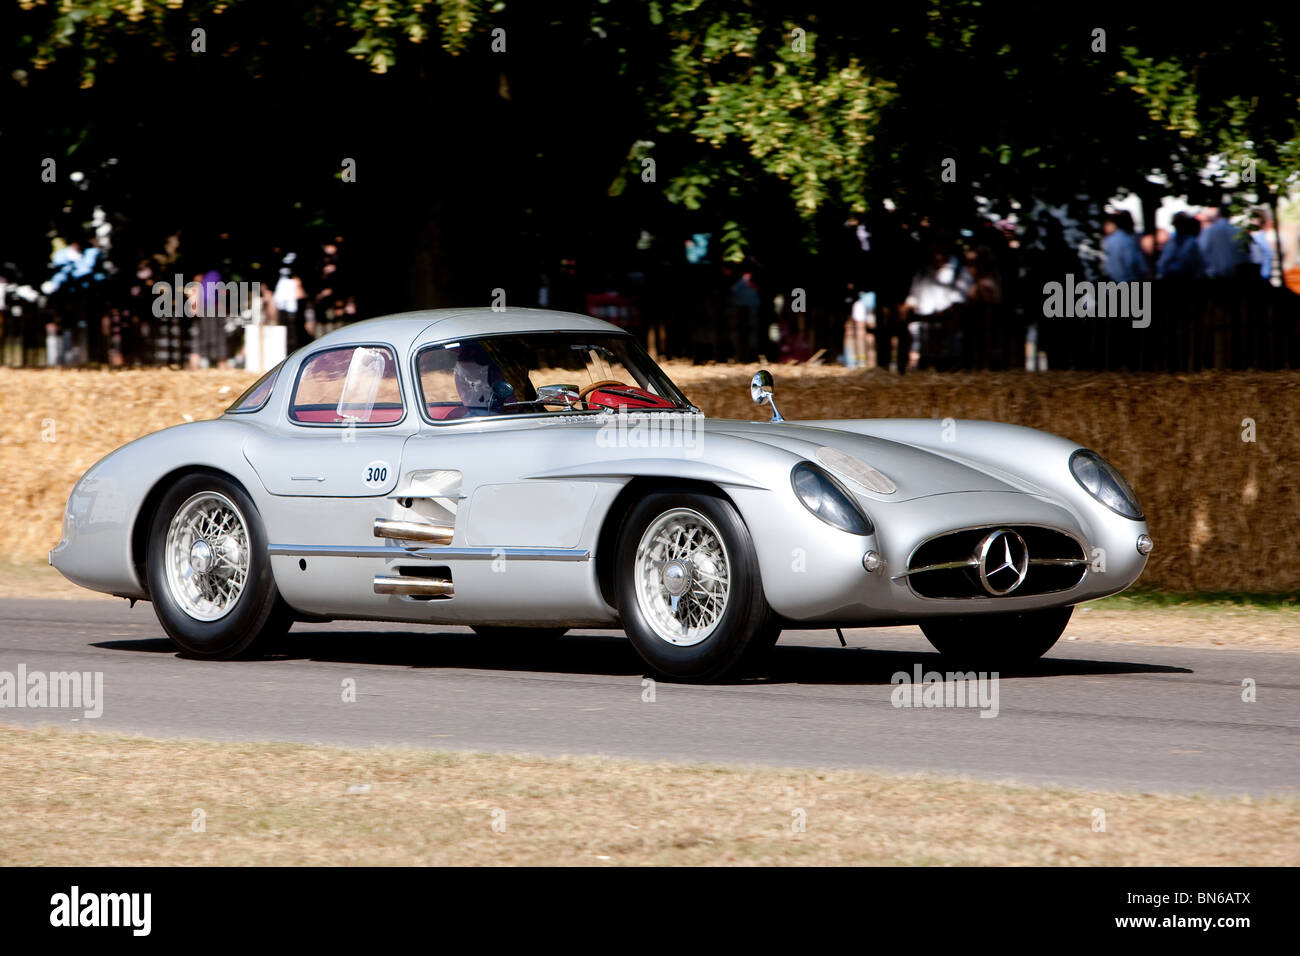 1955 Mercedes 300 Slr Uhlenhaut Coupe At The Festival Of Speed Stock Photo Alamy